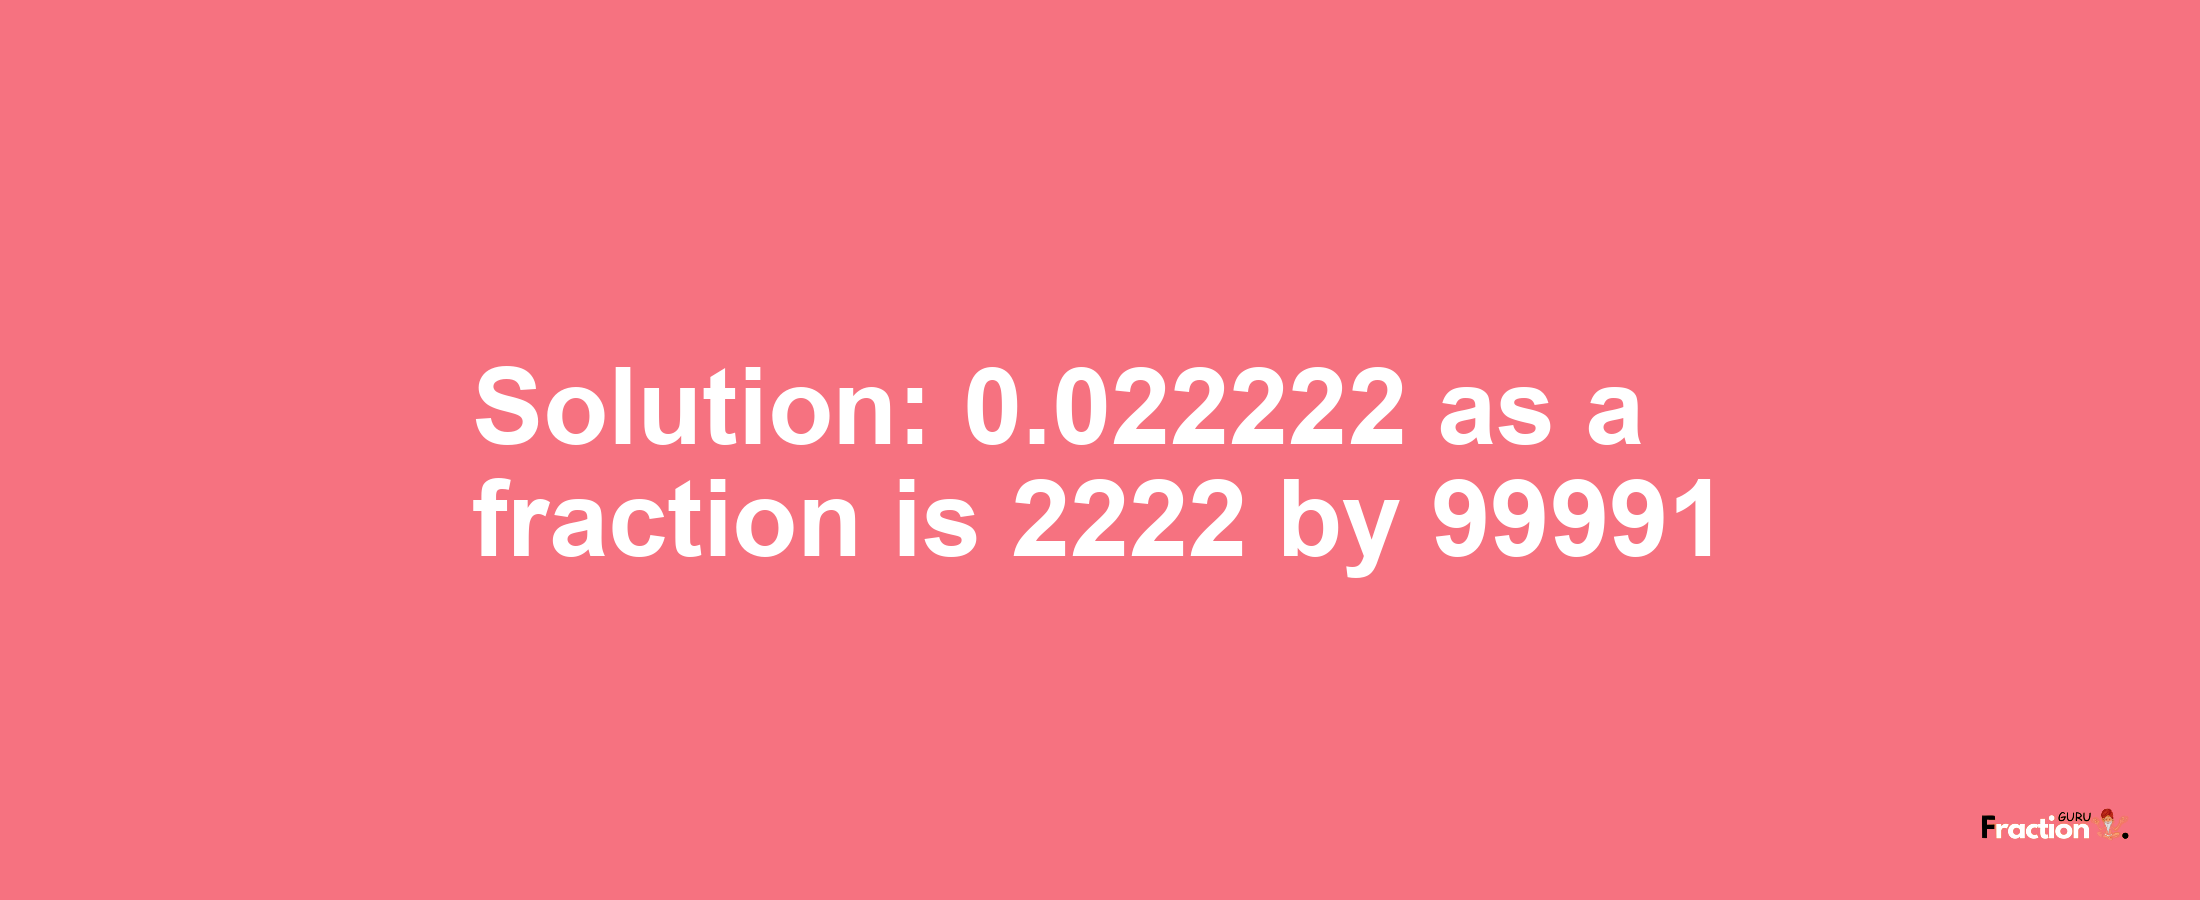 Solution:0.022222 as a fraction is 2222/99991